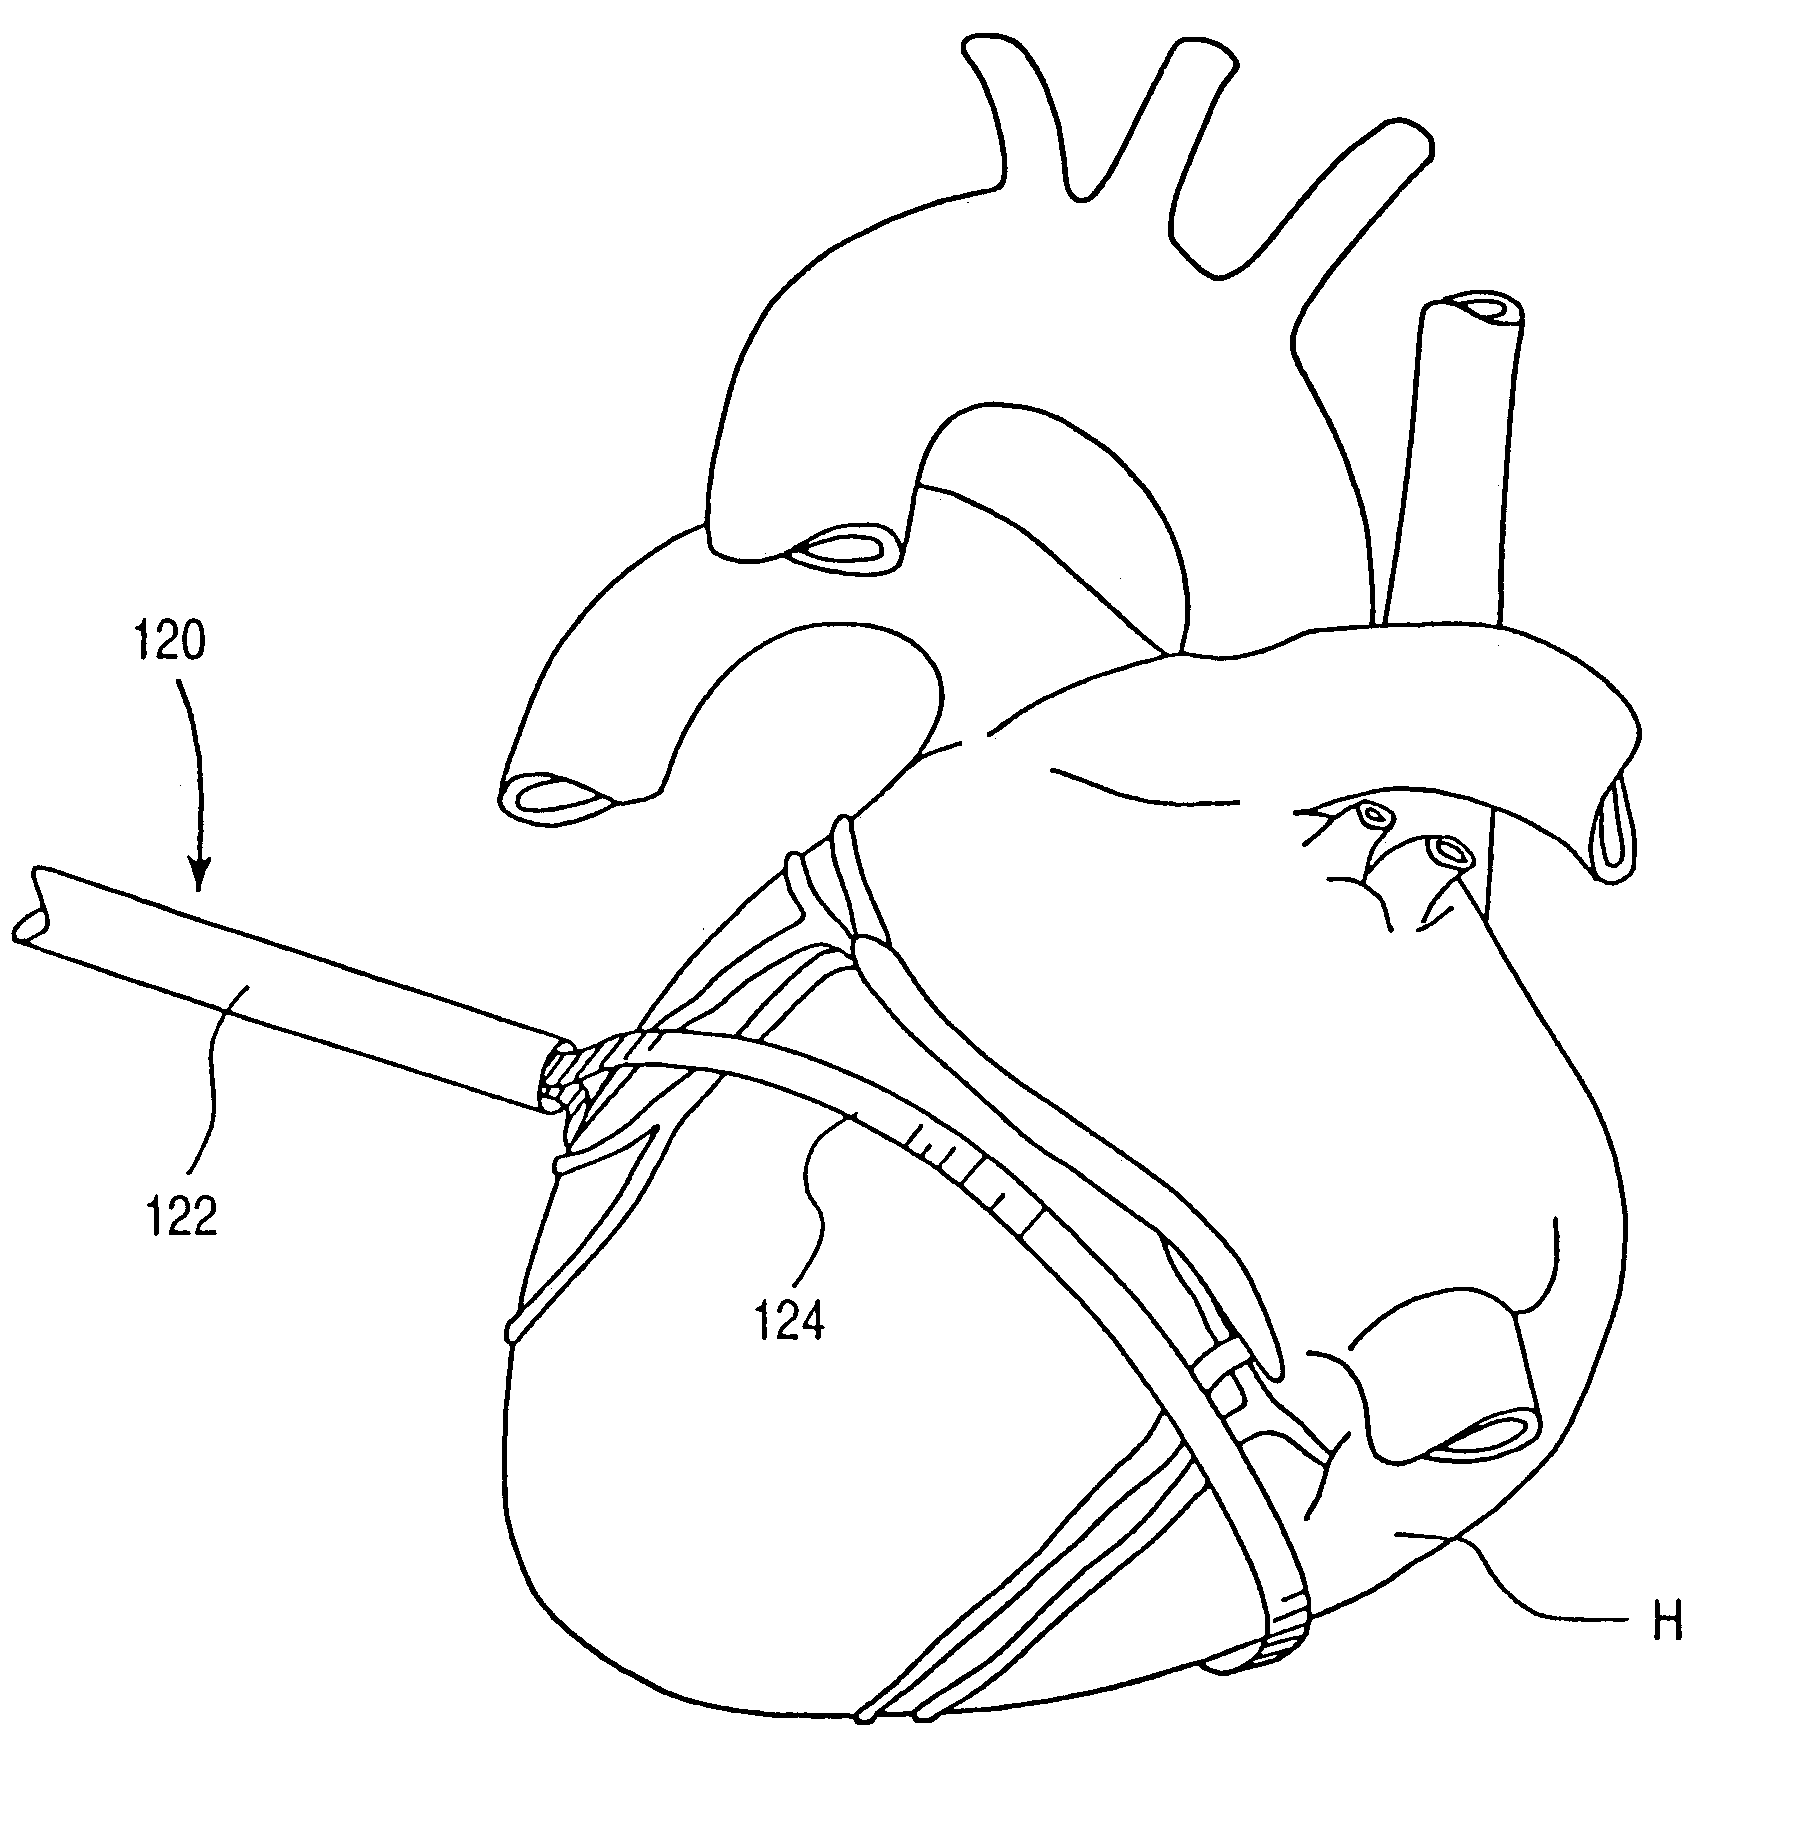 Minimally-invasive devices and methods for treatment of congestive heart failure